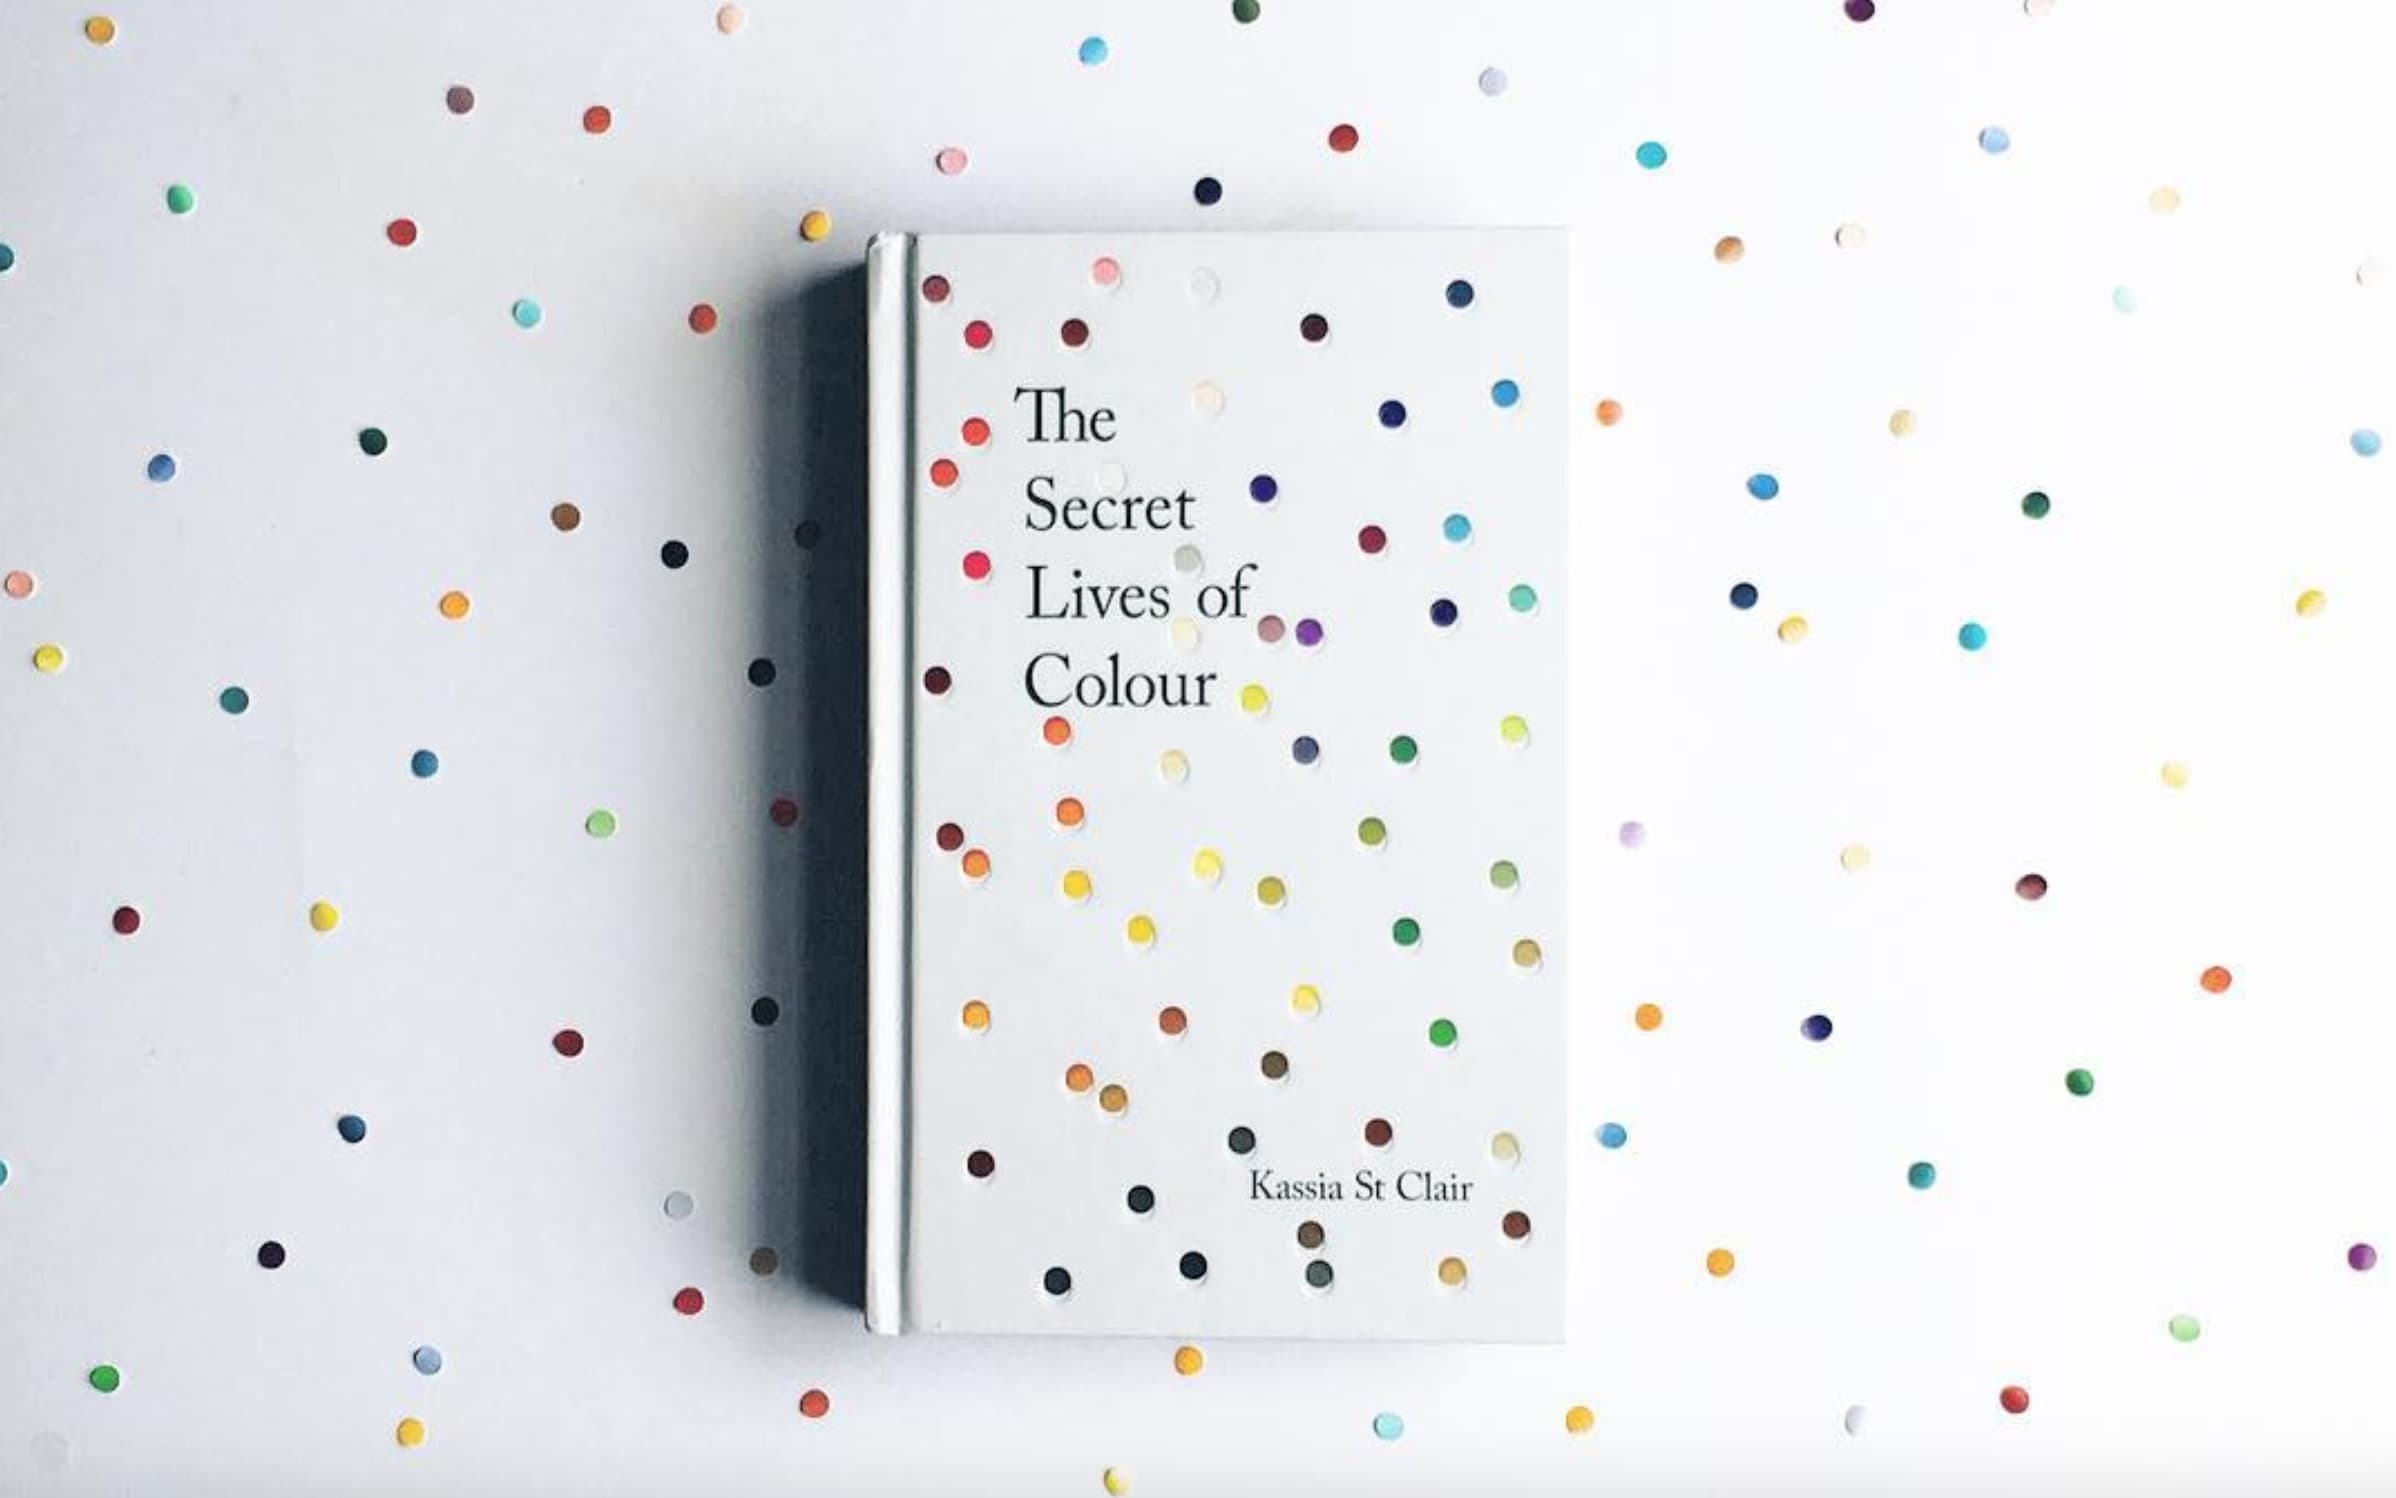 Book cover of The Secret Lives of Color by Kassia St Clair